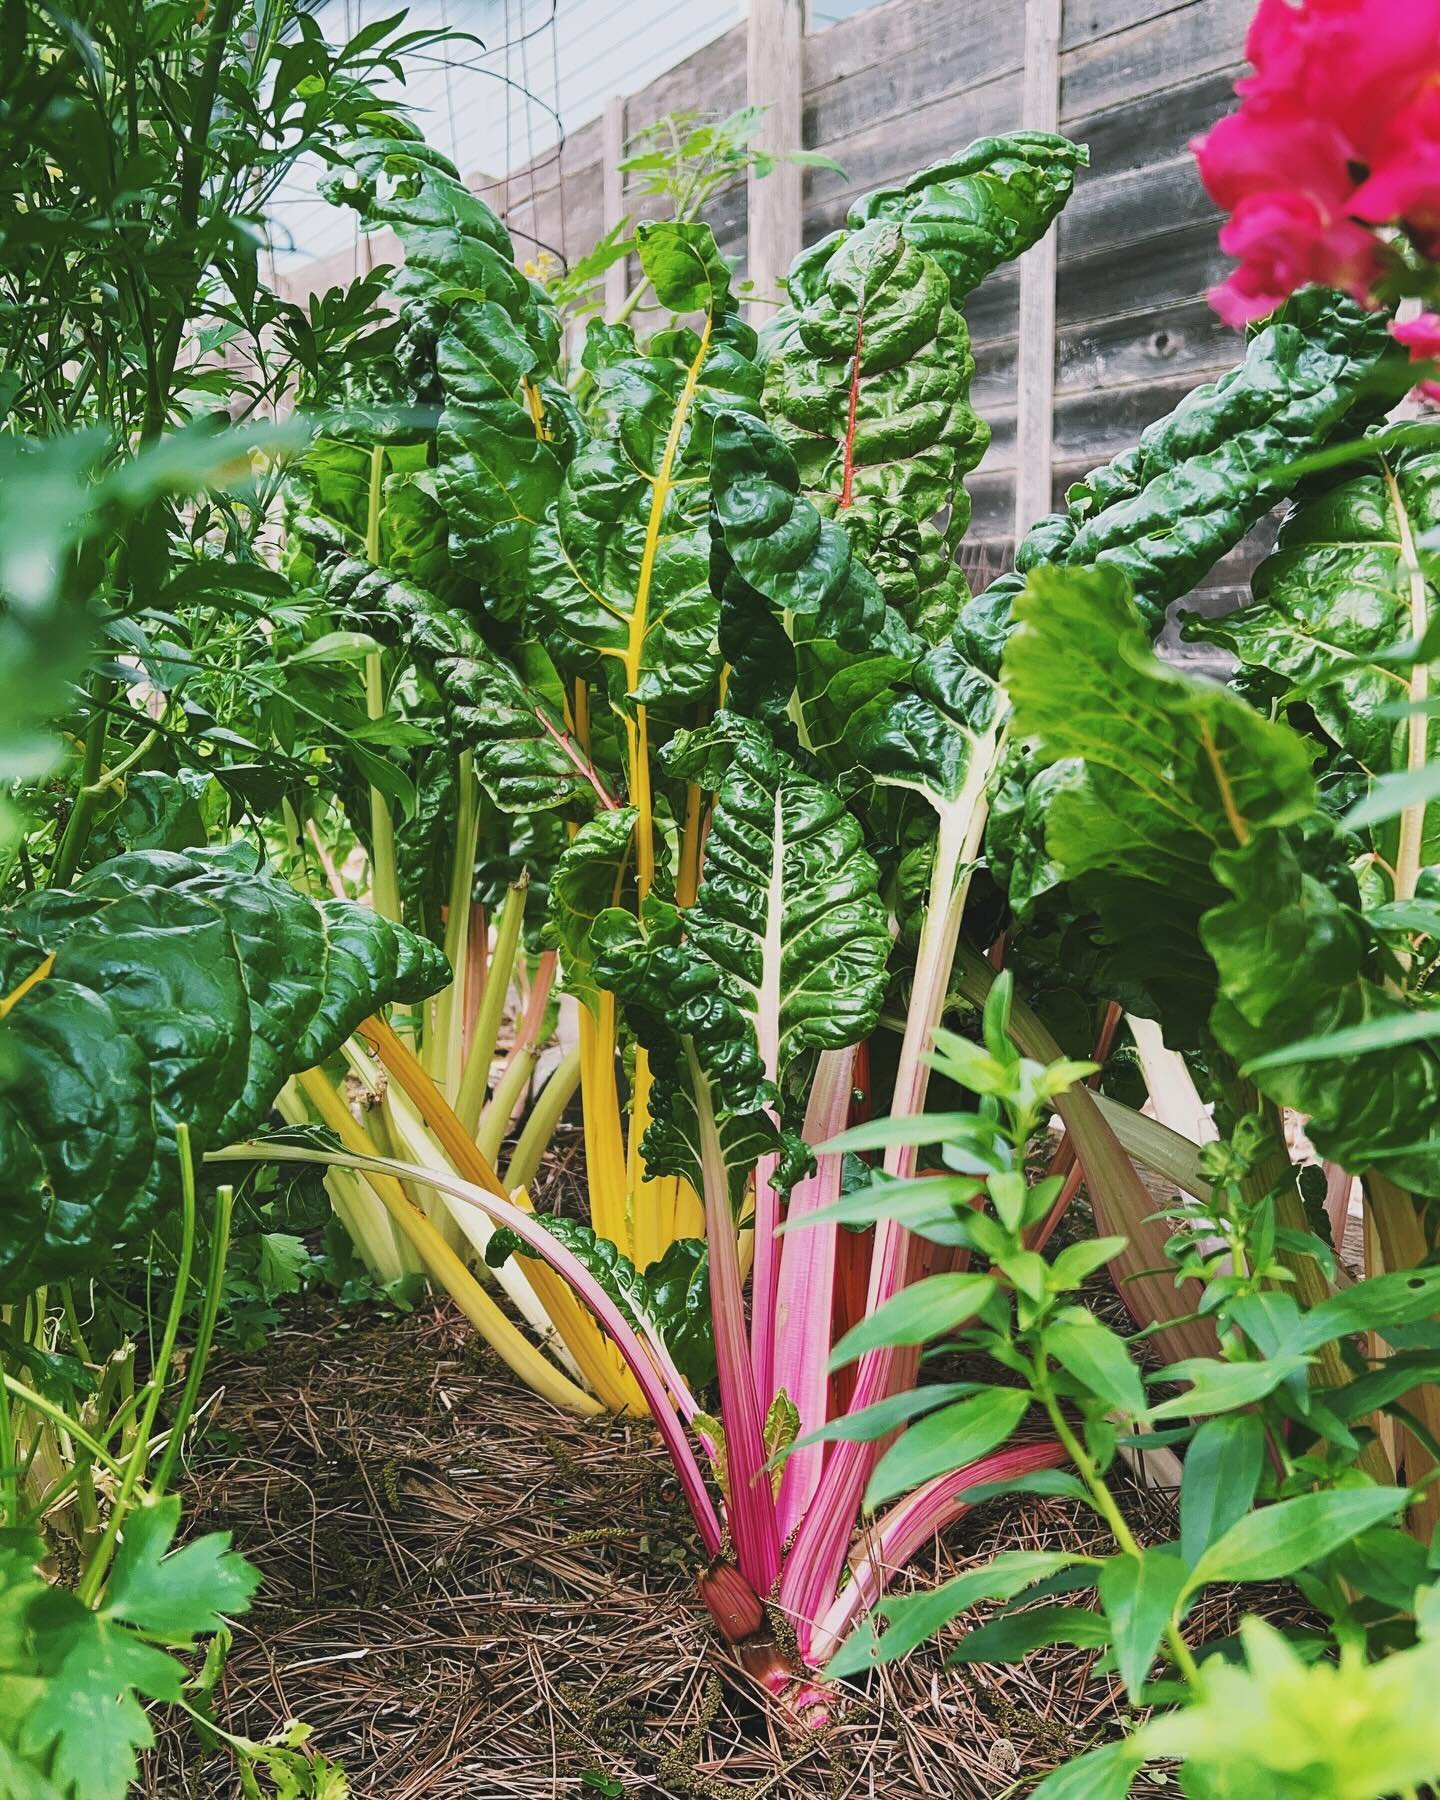 Is there anything more beautiful than Swiss Chard?